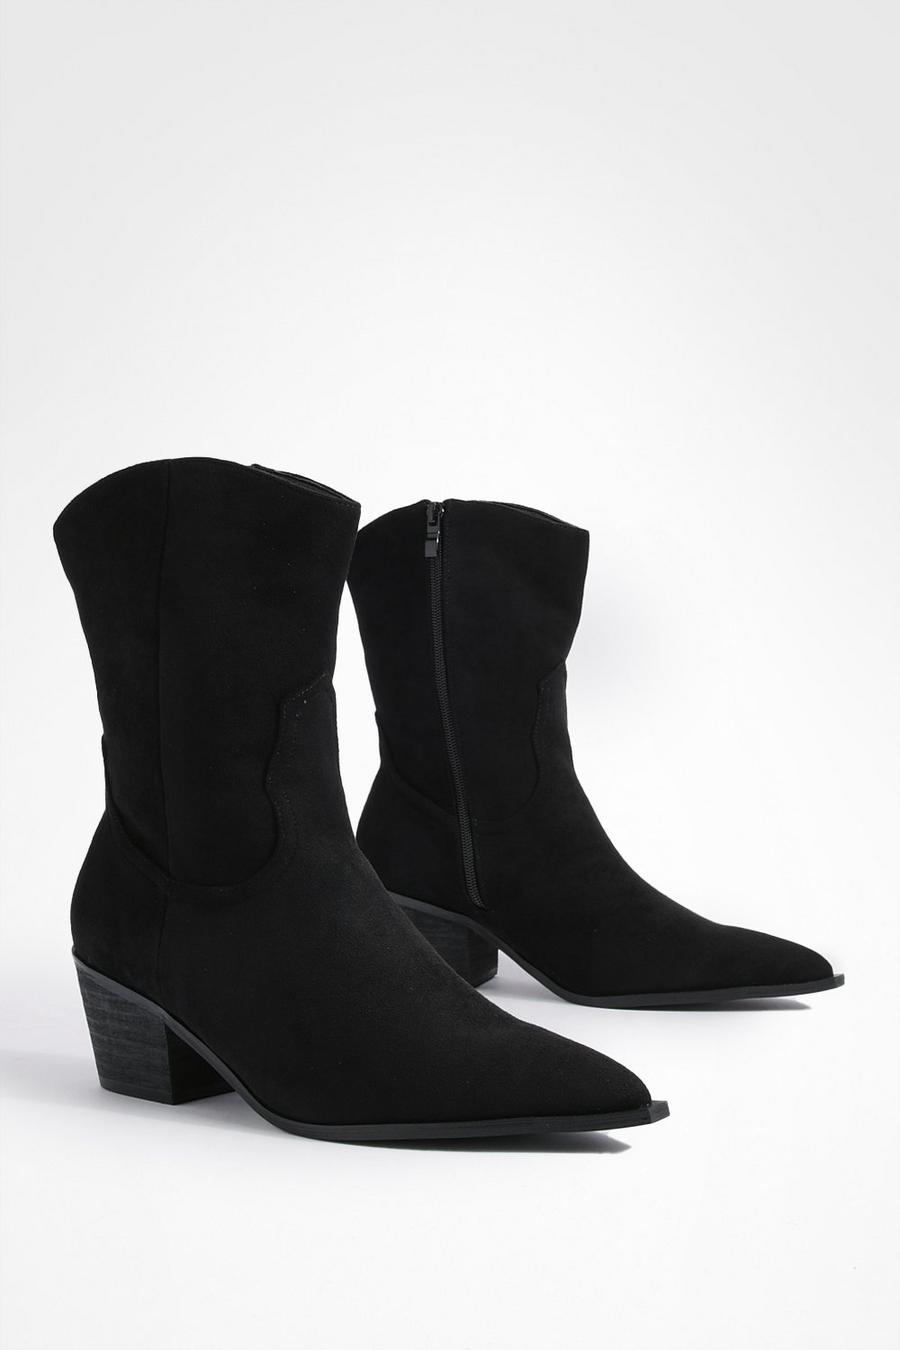 Black Cowboyboots med bred passform